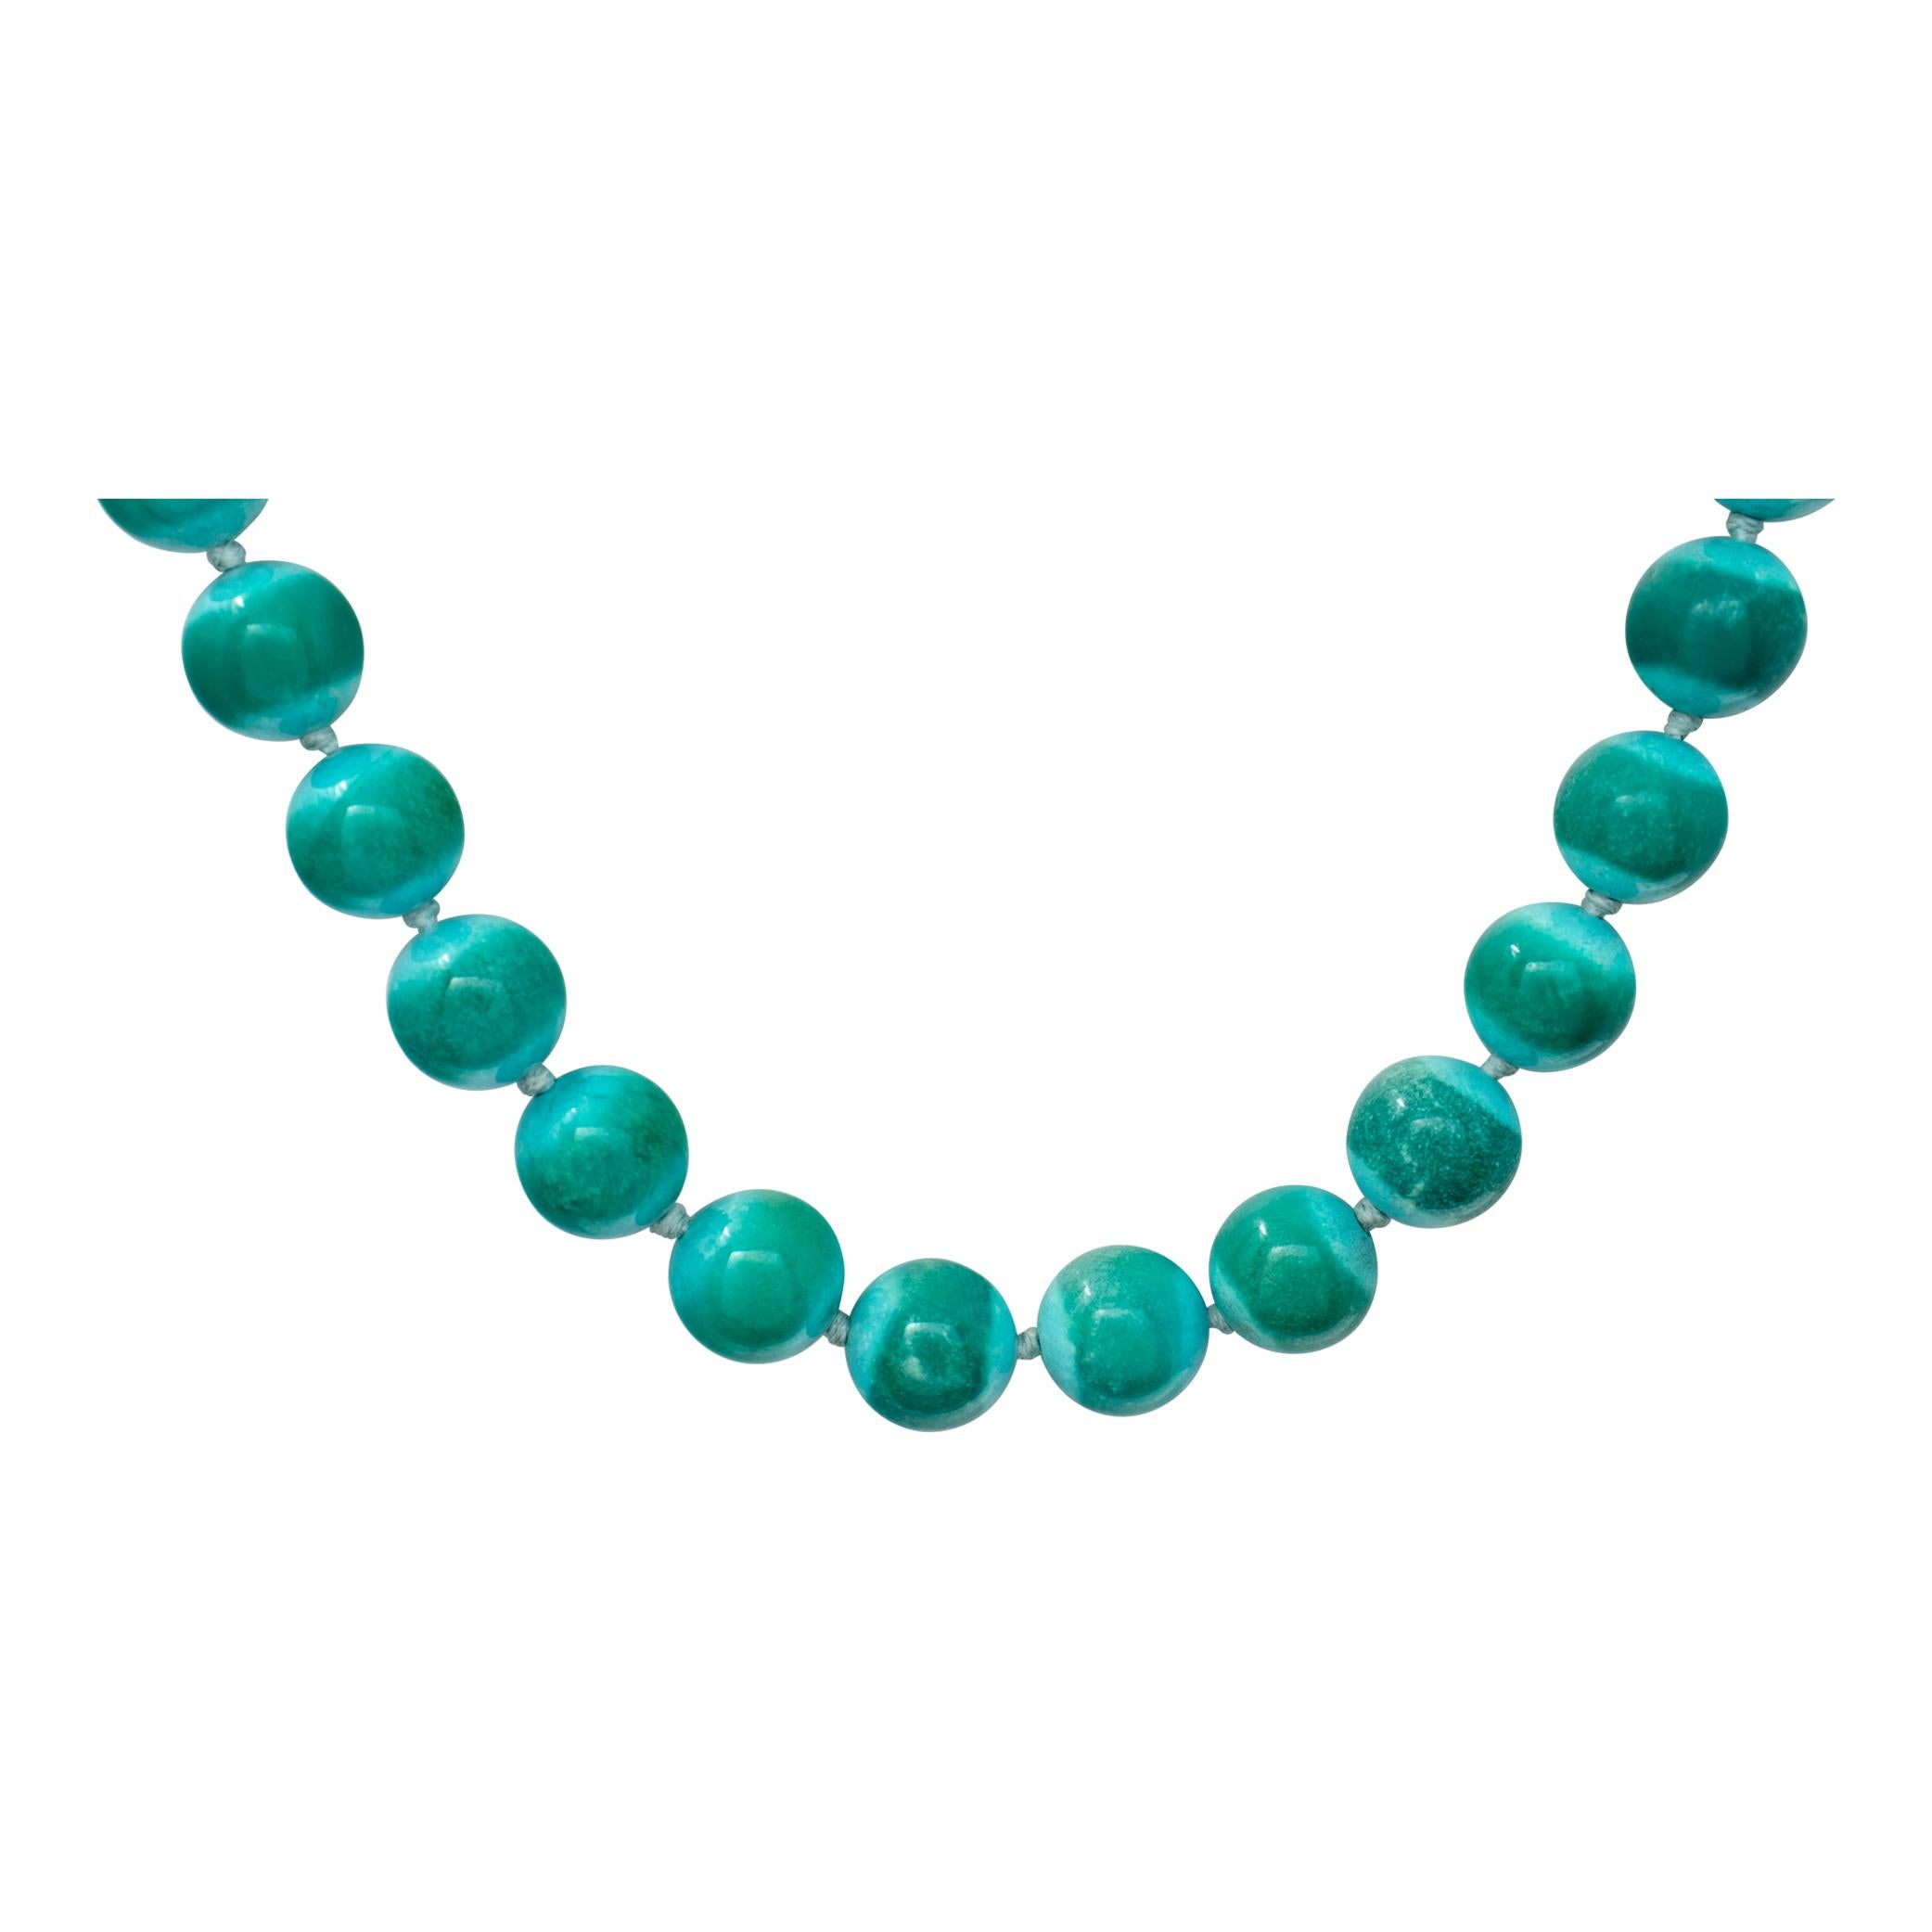 Angela Cummings Turquoise Bead Necklace with 18k gold clasp In Excellent Condition For Sale In Surfside, FL